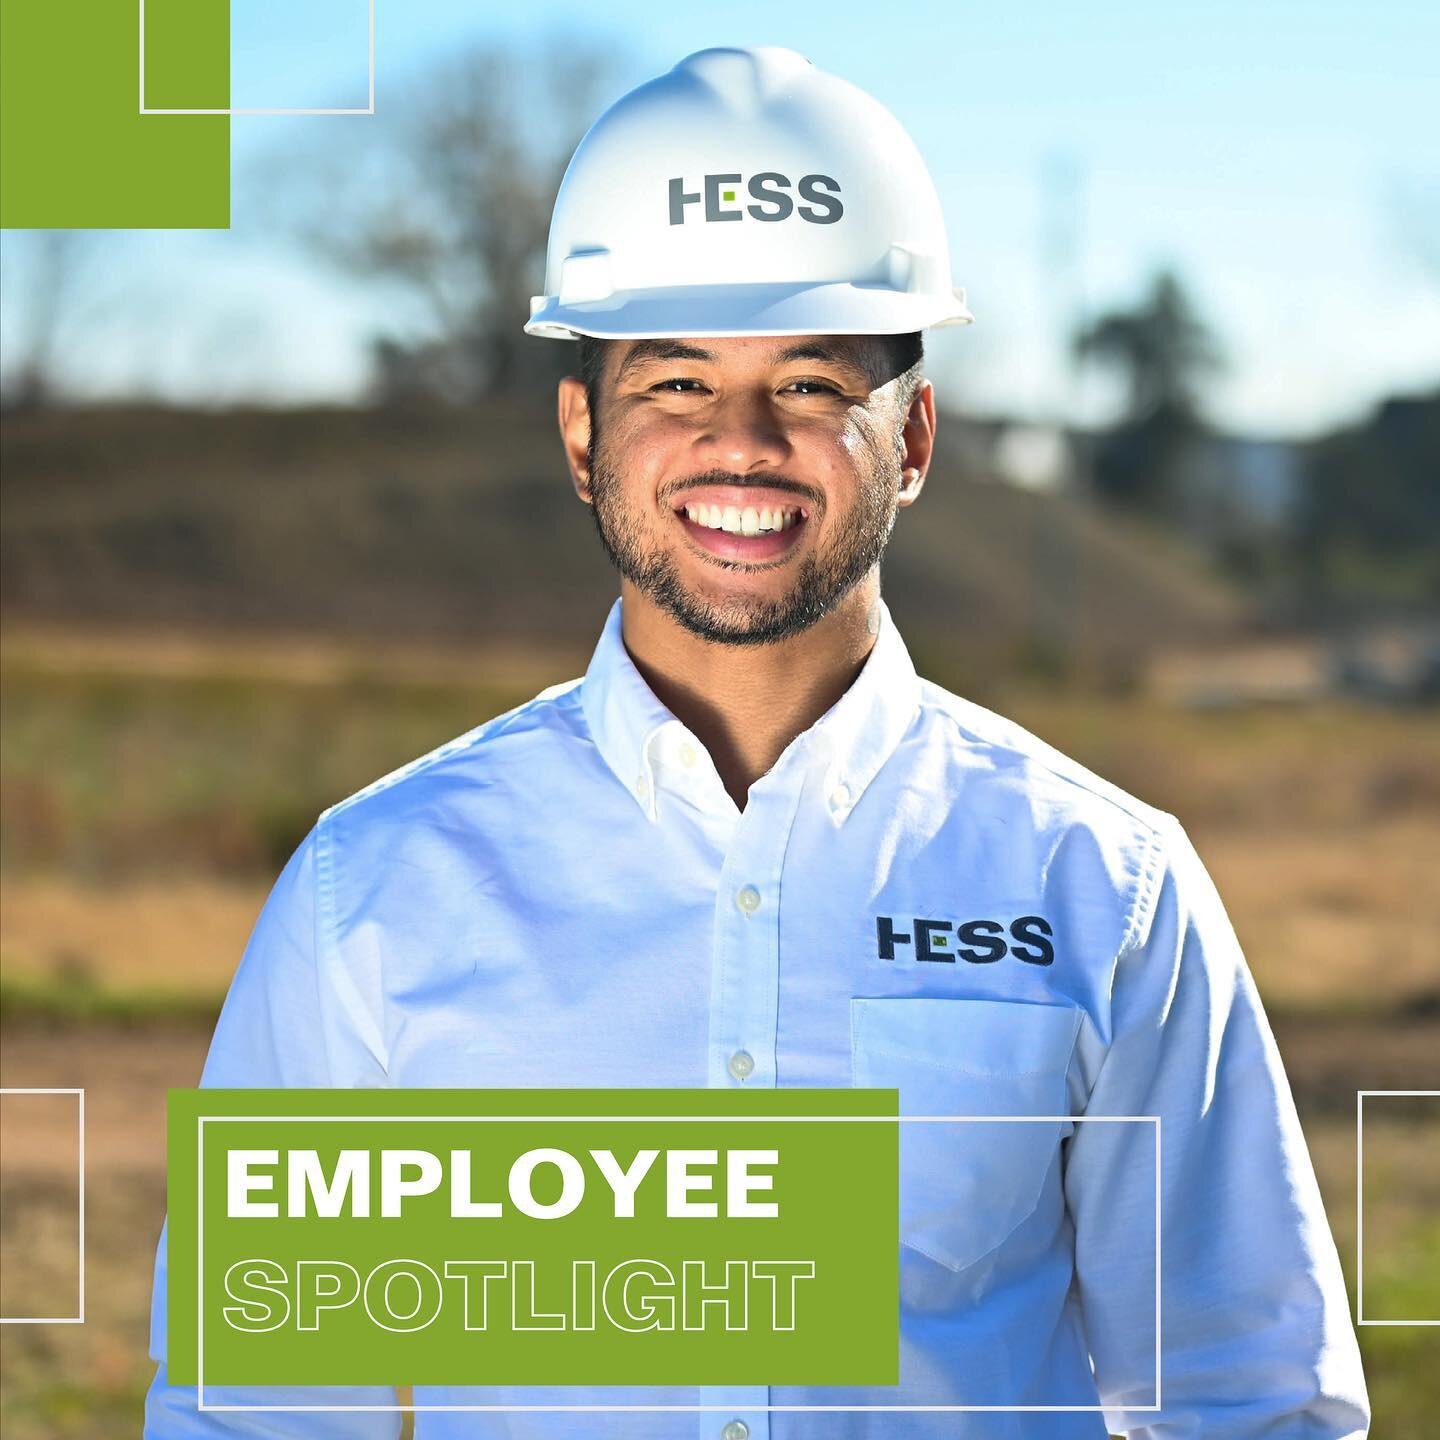 Meet Justin Mayo, one of our amazing Field Engineers who is working on the new Hal and Berni Hanson Regional Park in Loudoun County, VA. &ldquo;I enjoy being able to impact the community in a positive way by providing the public with a place to build